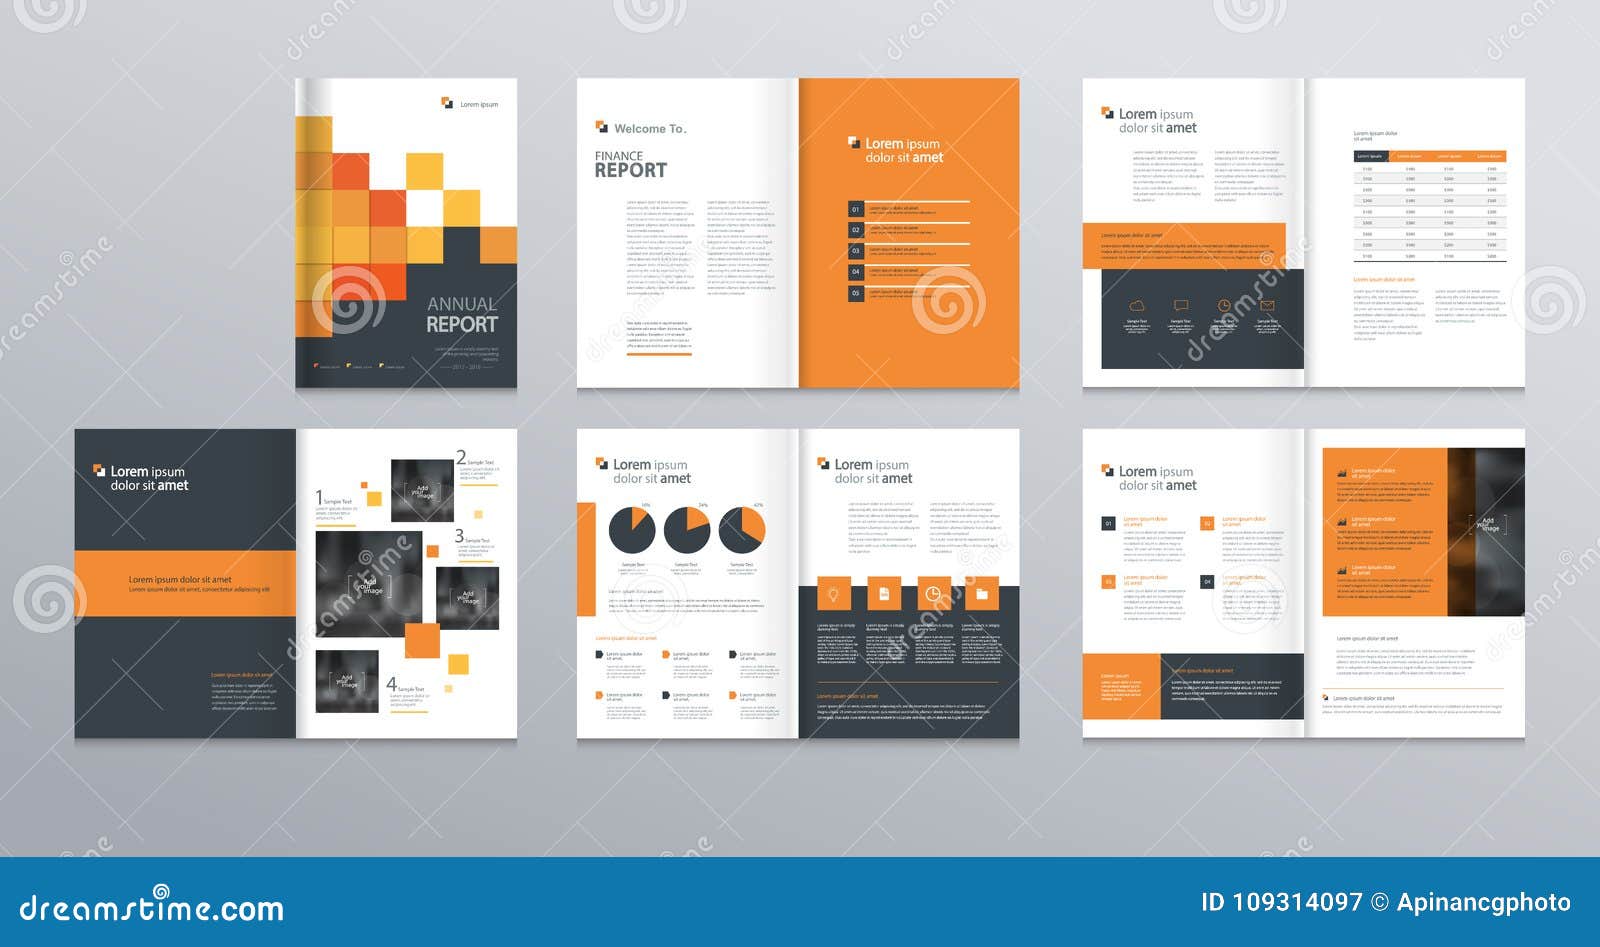 Template Layout Design With Cover Page For Company Profile Annual